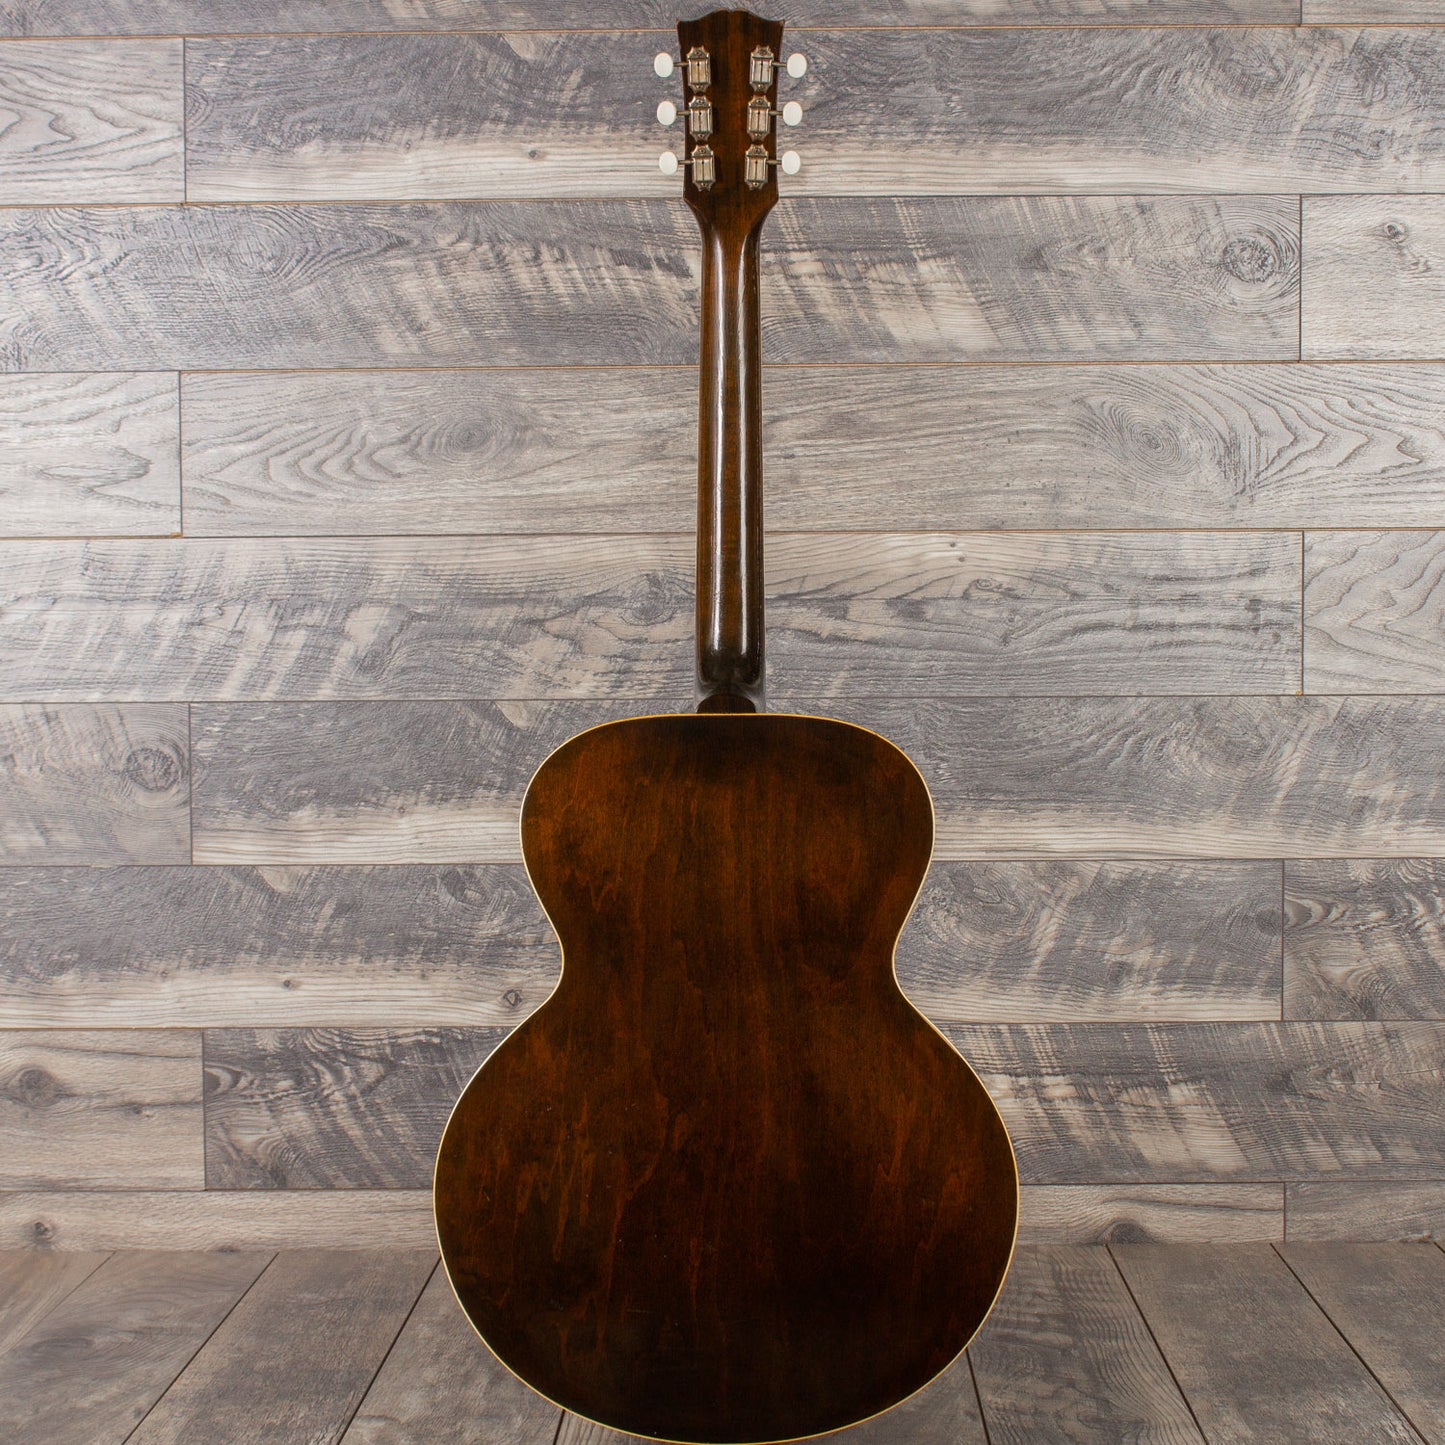 1954 Gibson L-50